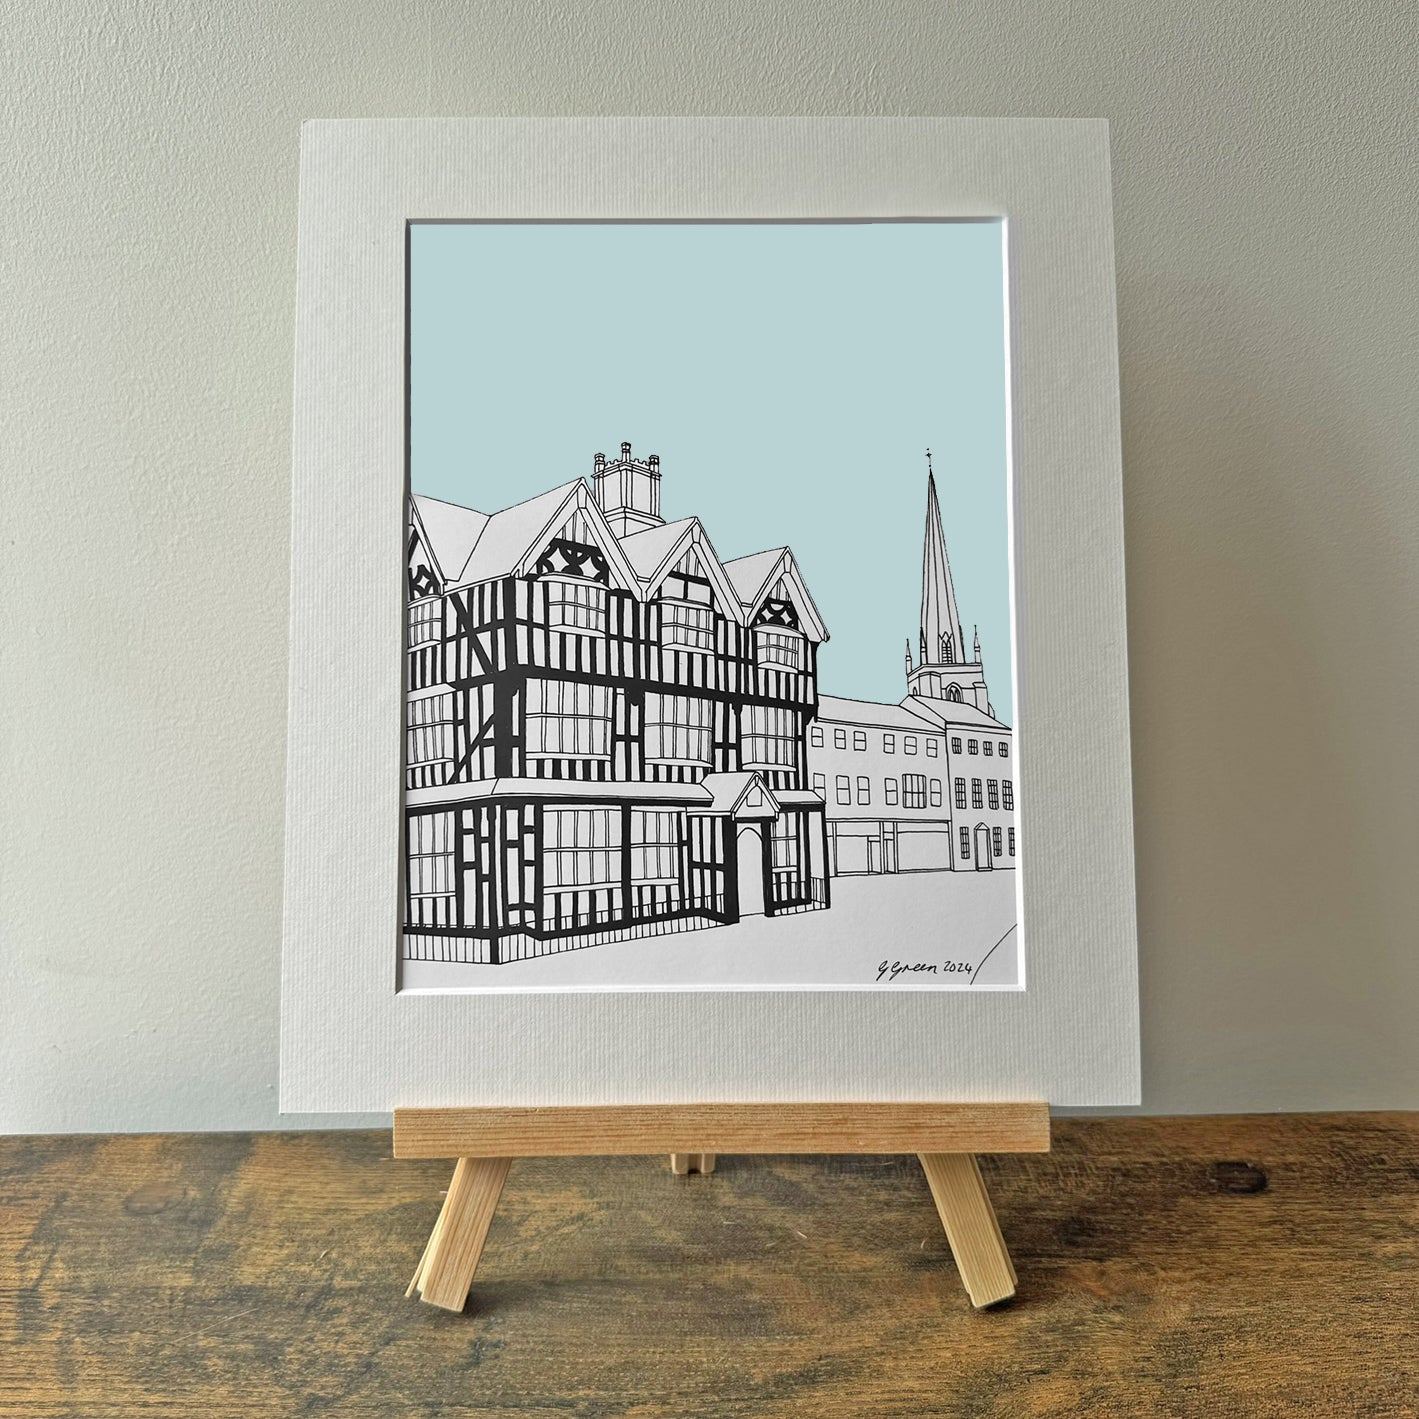 Hereford Giclee Print 25cm x 20cm (Limited Edition)